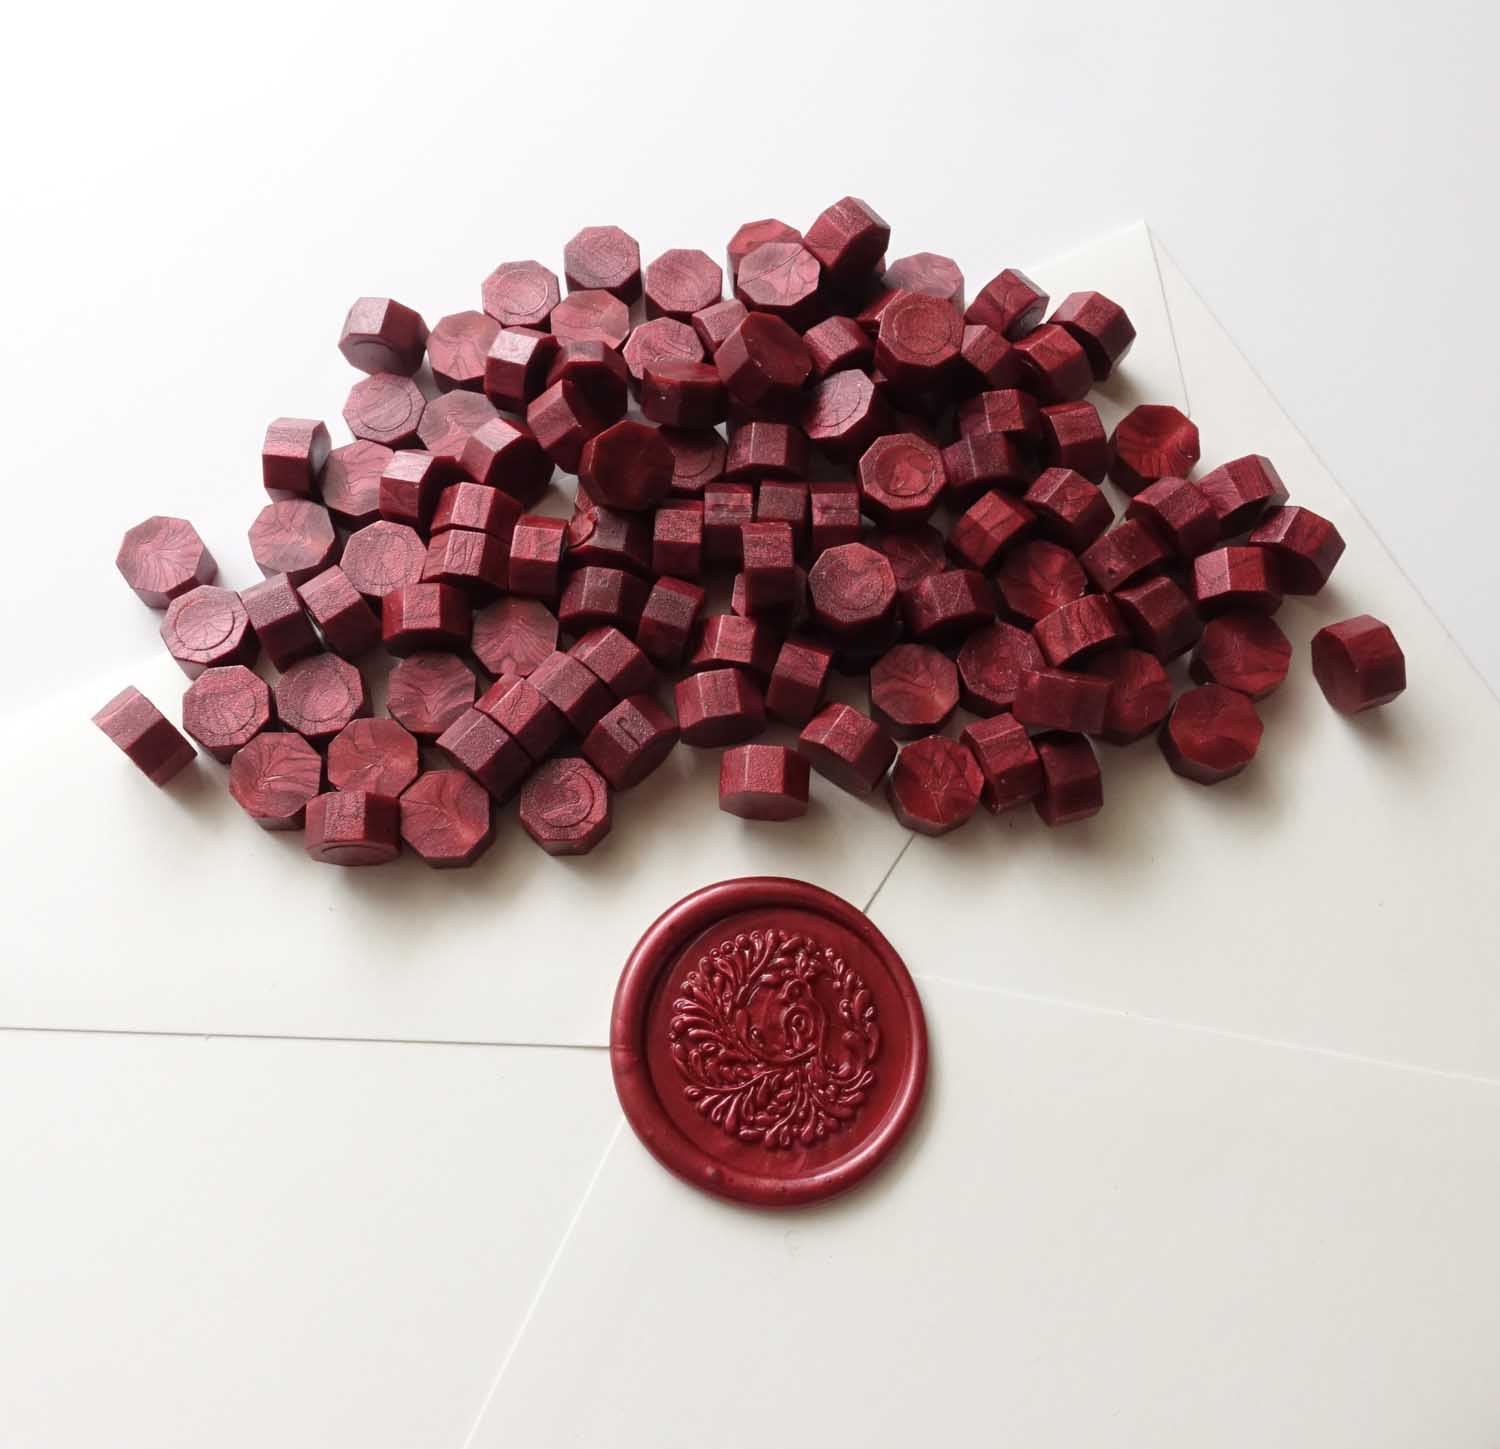 Burgundy wax beads pellets granules with song bird wax seal on white envelope